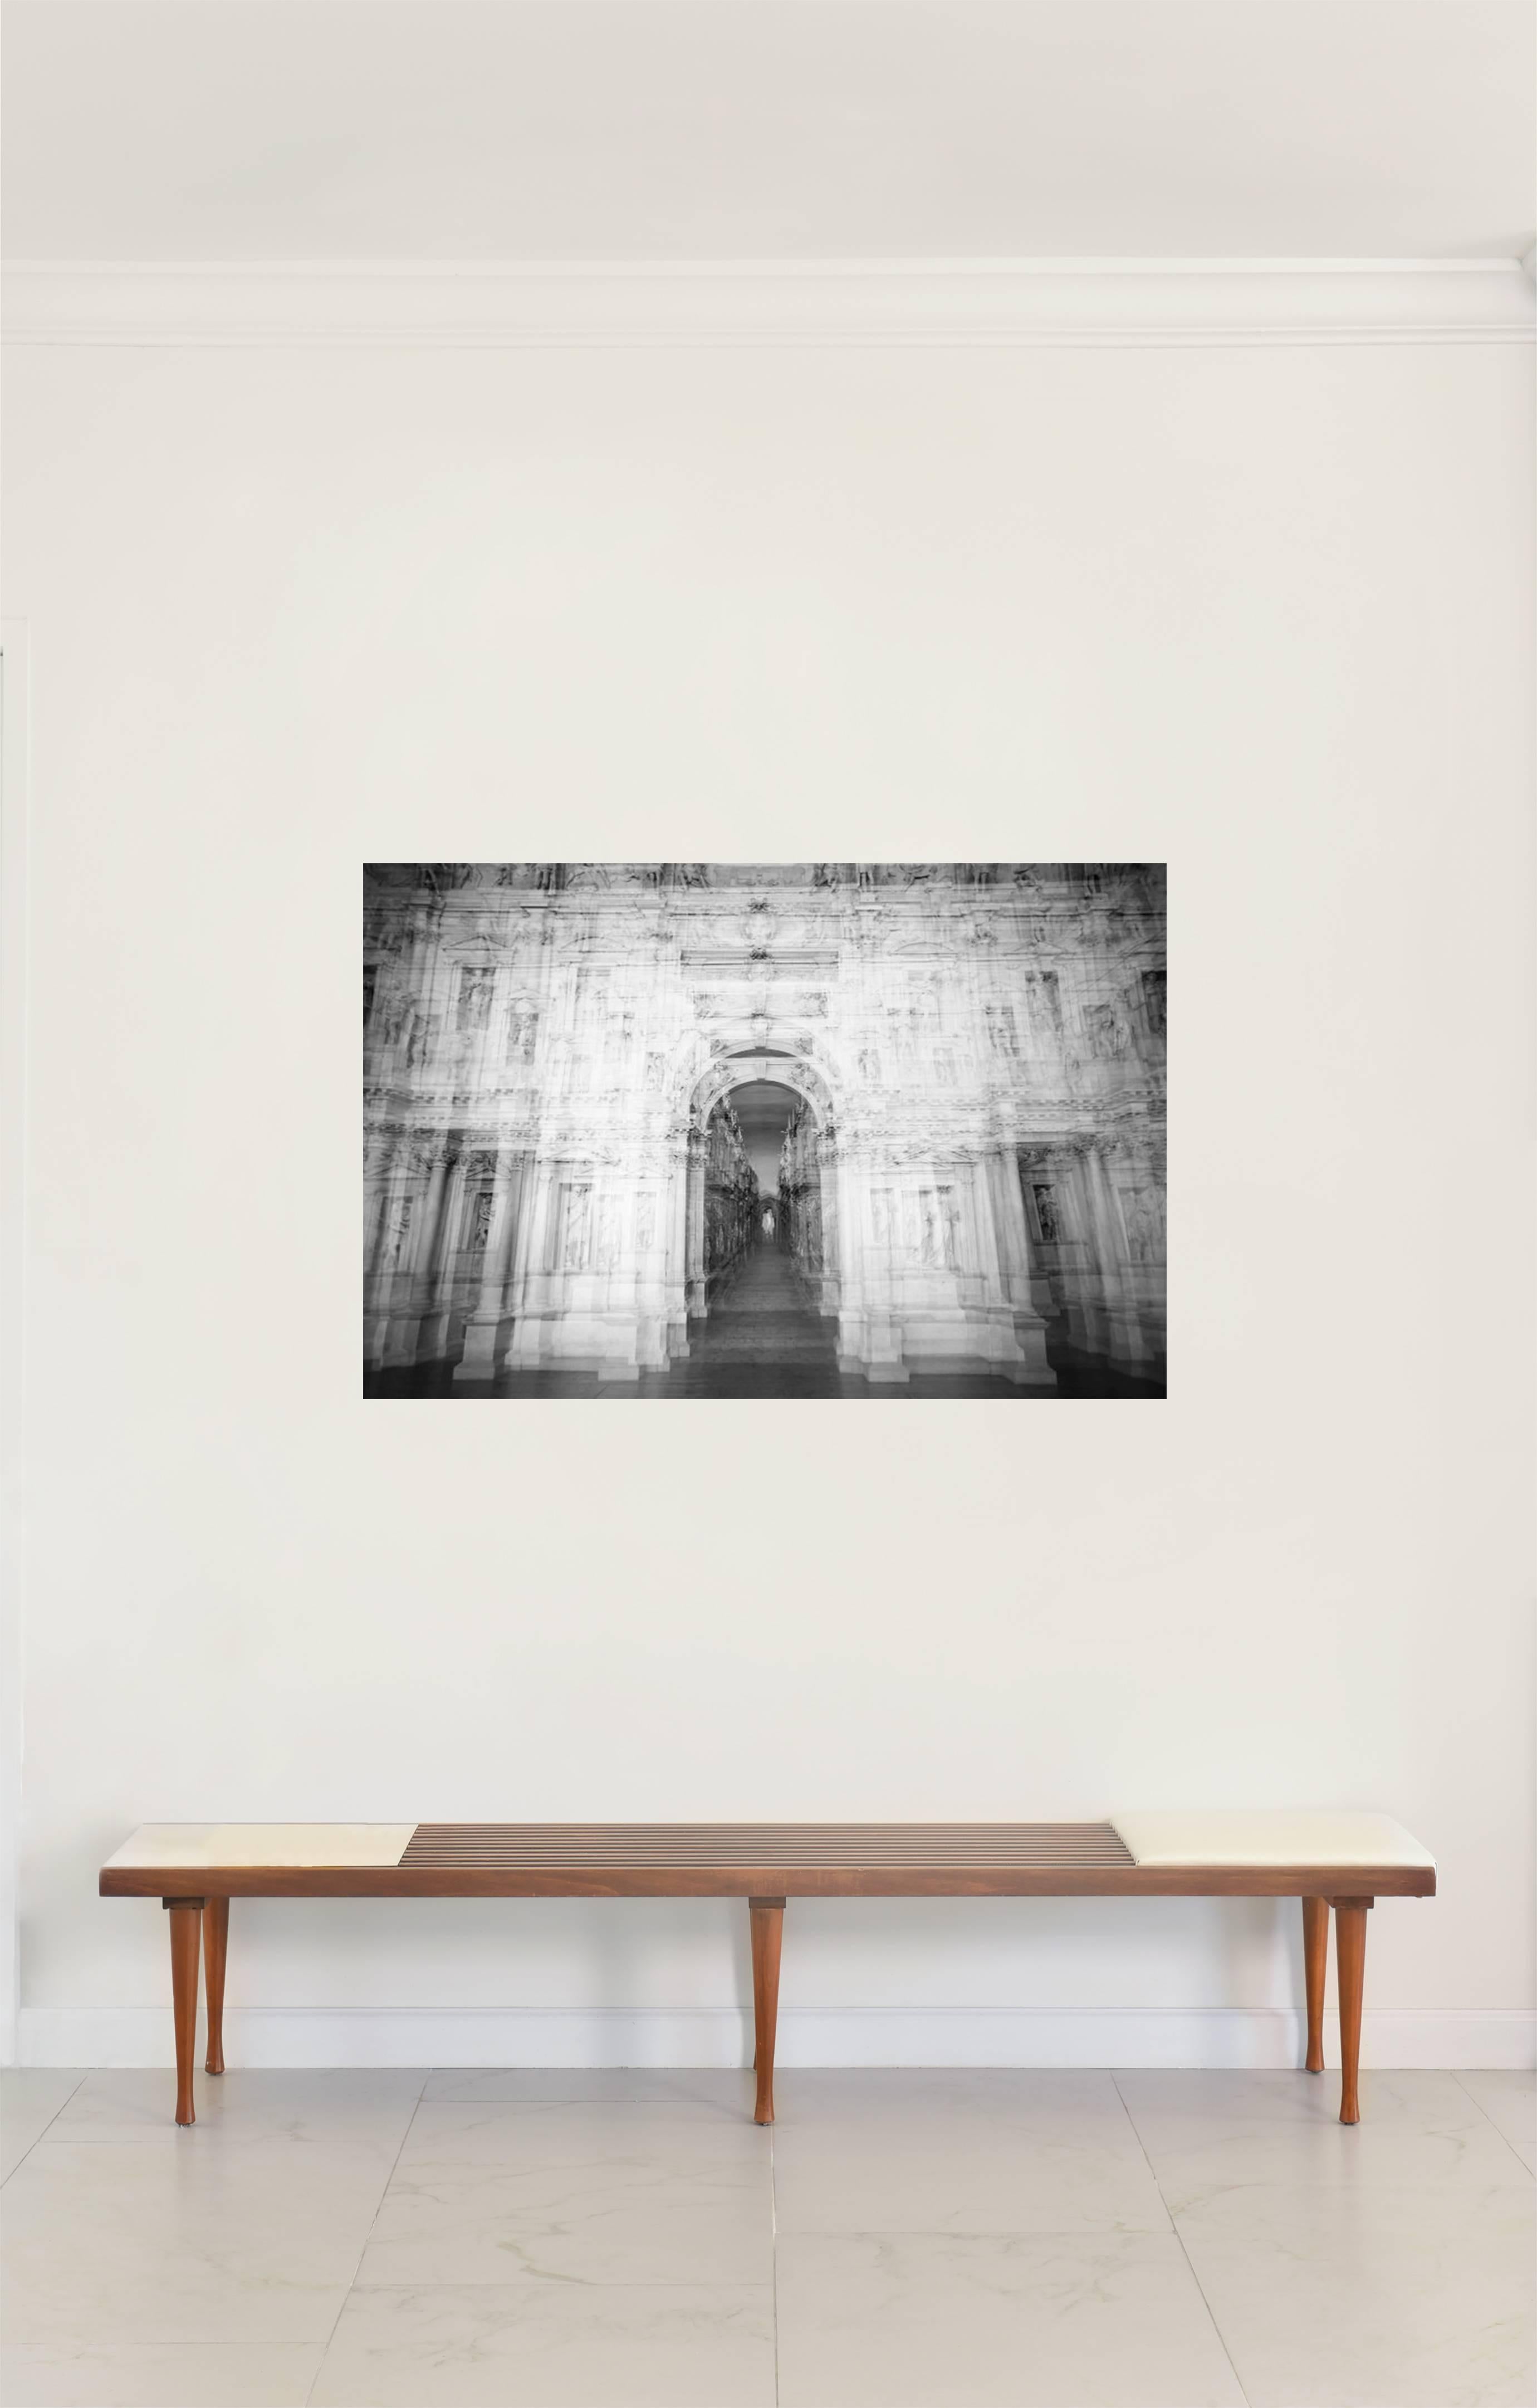 Teatro Olimpico - Vicenza, Abstract architectural  Black and White photograph - Photograph by Magda Von Hanau